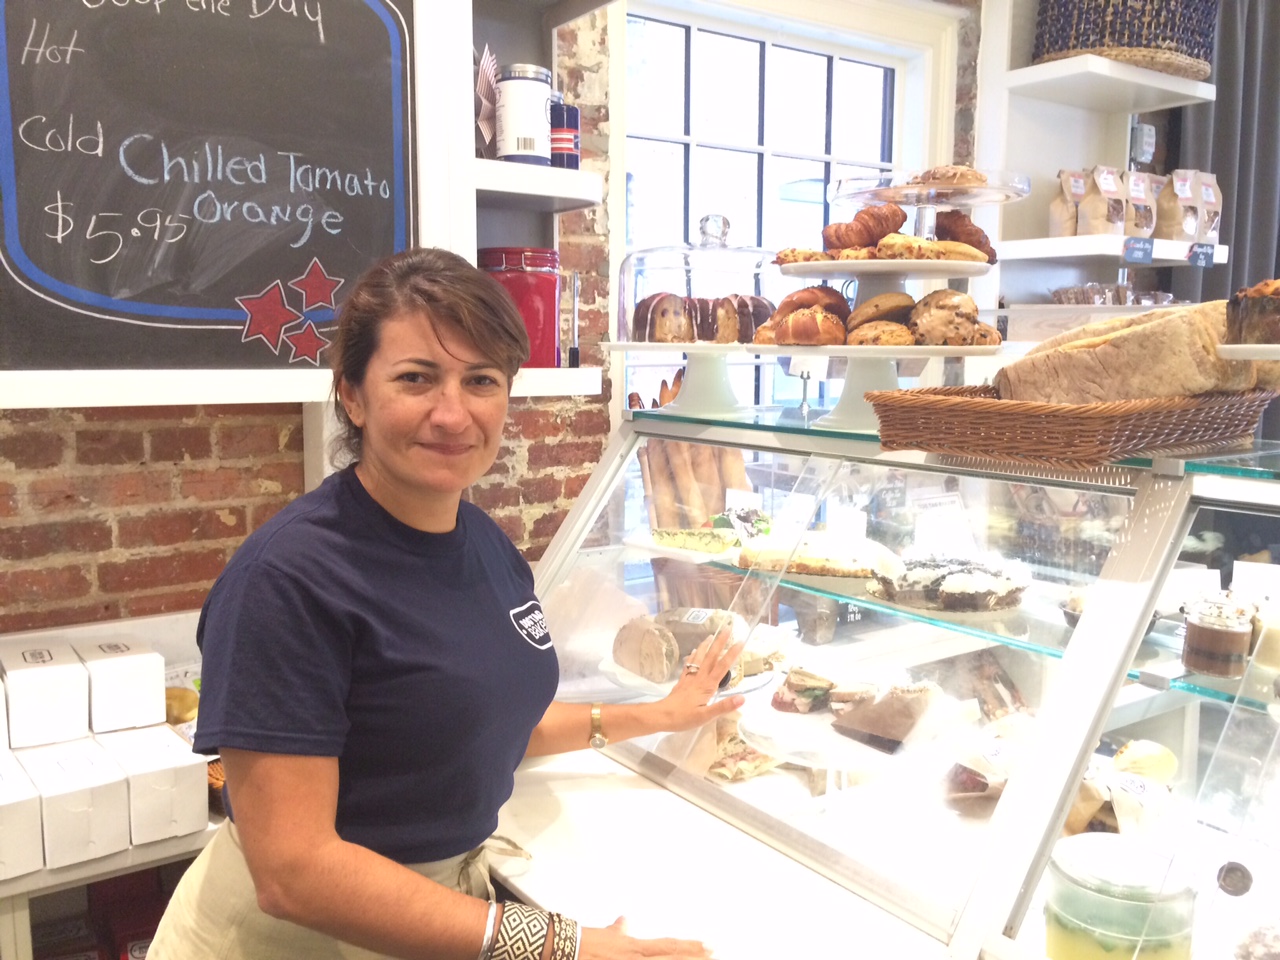 Ximena Rozo works the front counter at Dog Tag Bakery. It’s through kneading dough that Rozo says she has learned the best ways make dough from her furniture business. (WTOP/Rachel Nania)